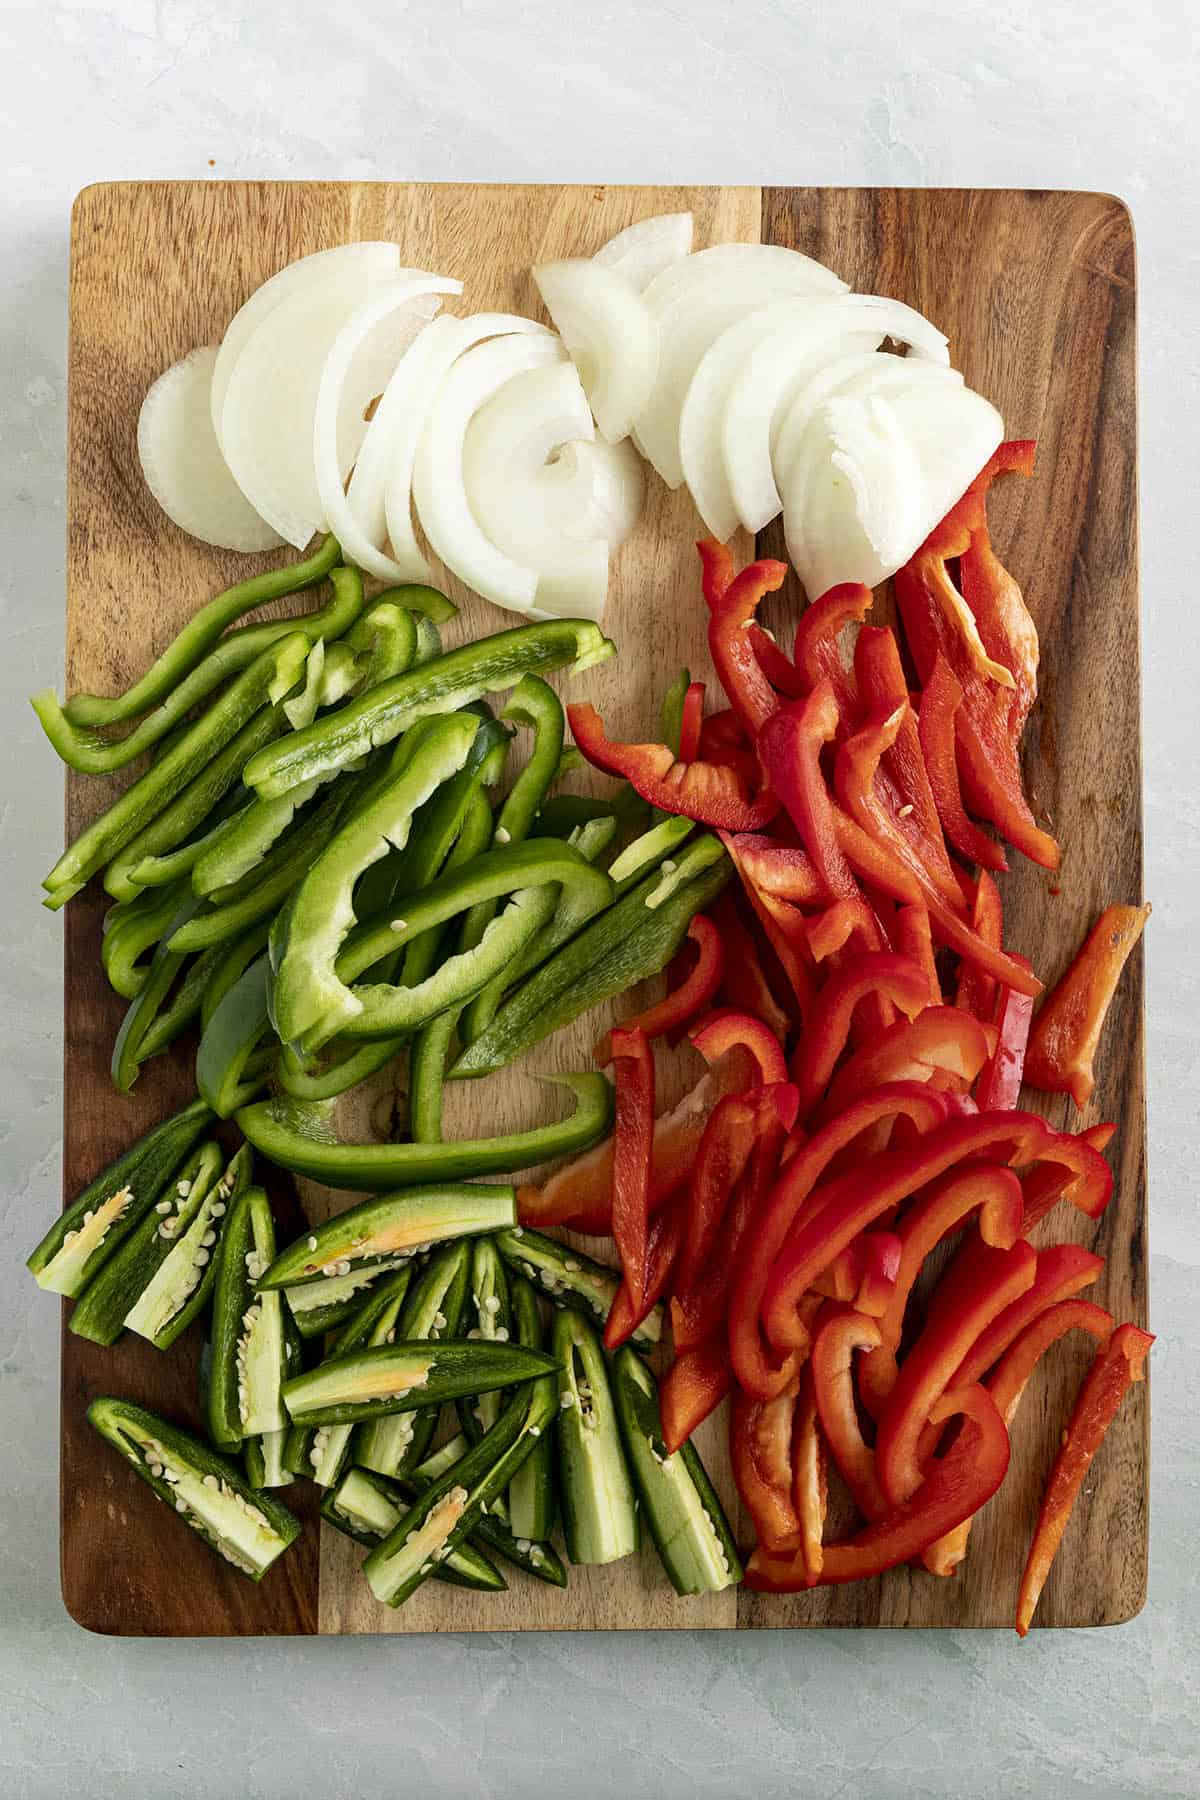 Chopped peppers and onions on a cutting board